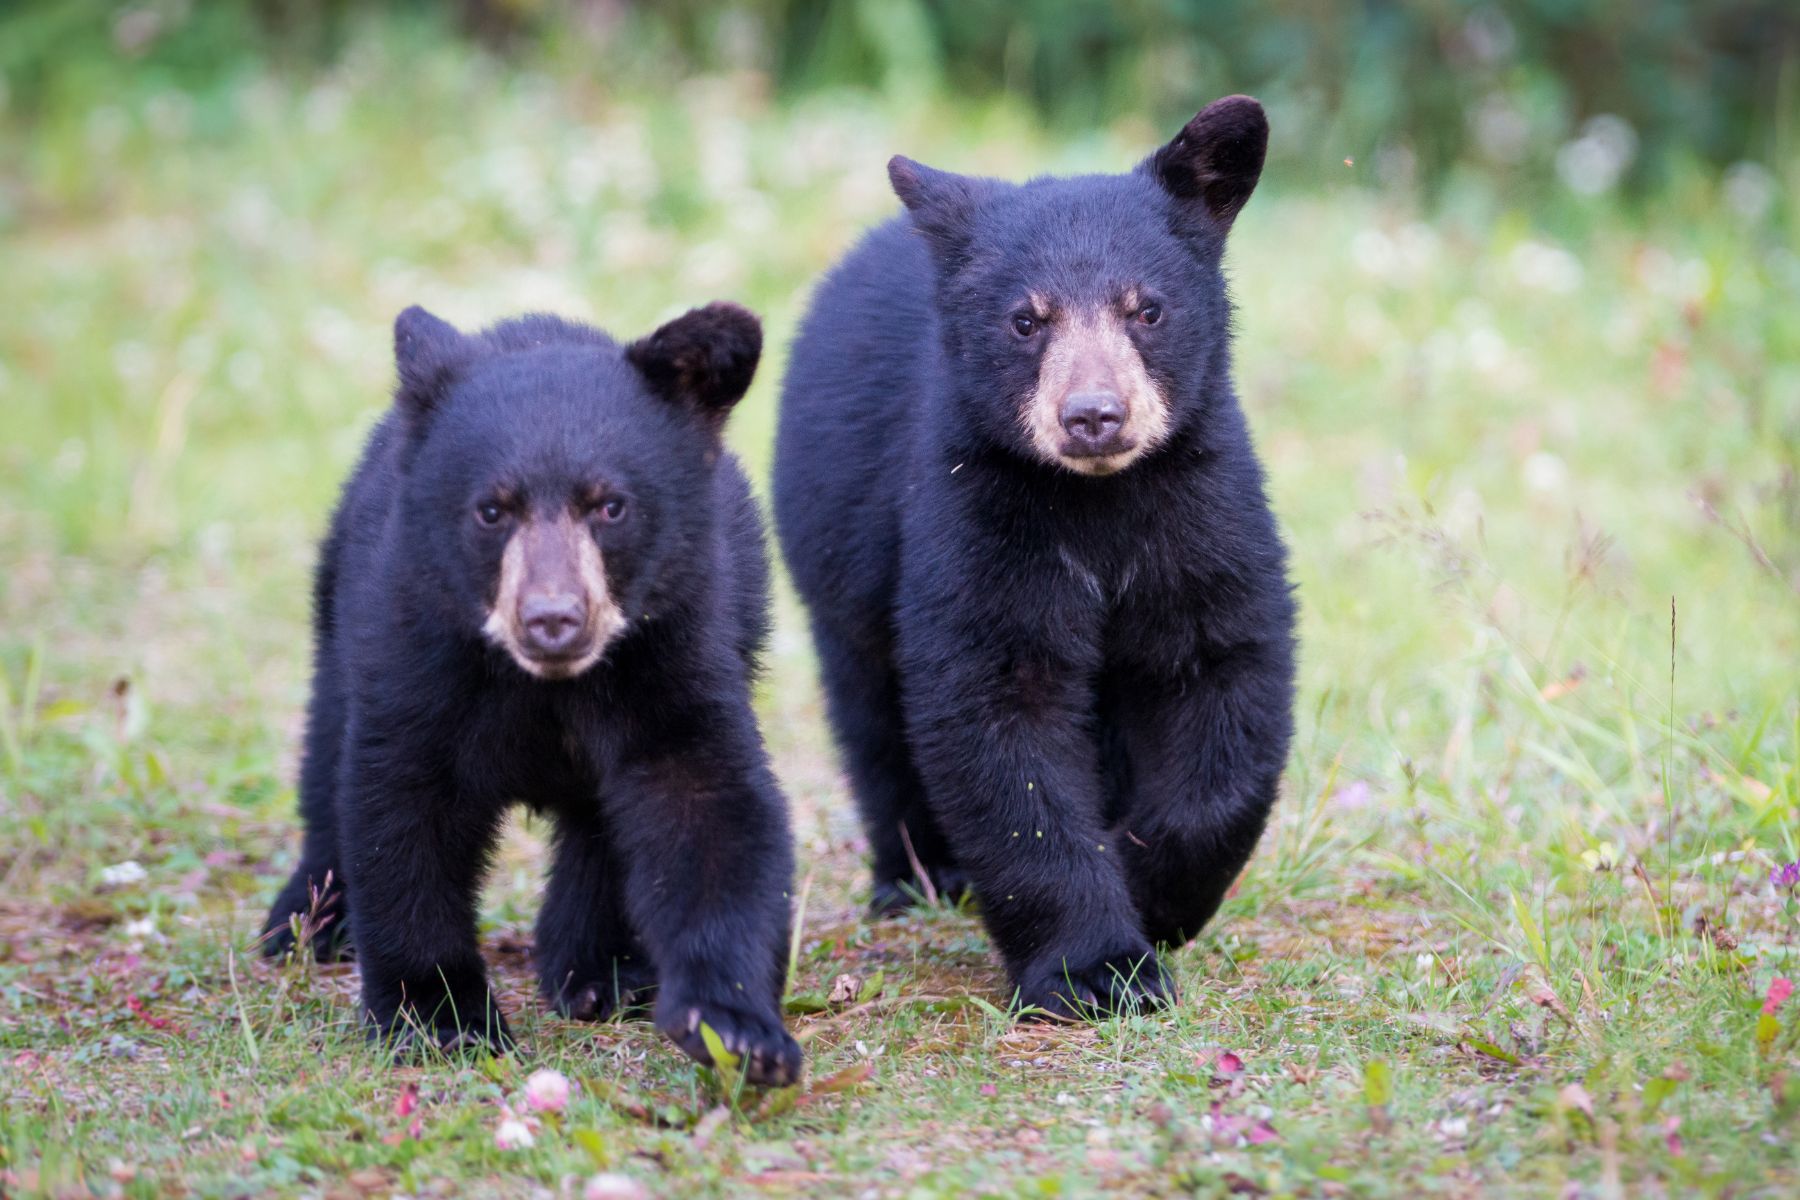 do i have to worry about bears while hiking in North Carolina?